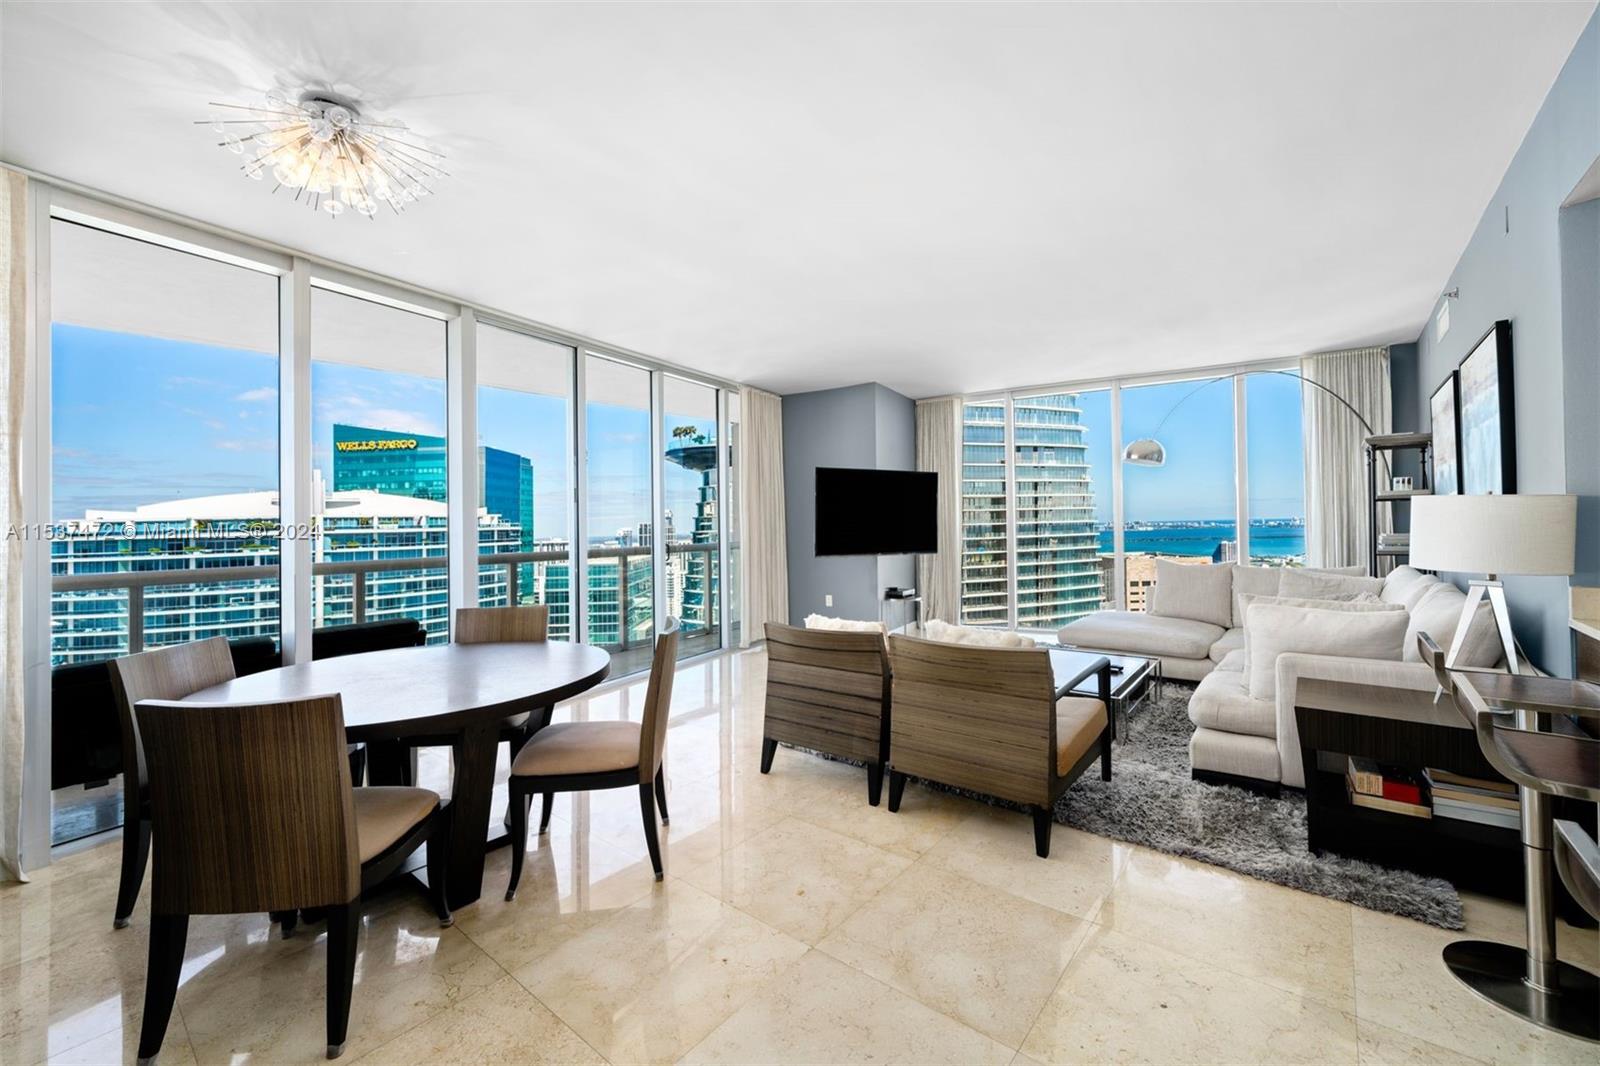 A beautifully furnished 2 Bed, 2 Bath condo at Icon Brickell Tower 1 featuring marble flooring throughout the main living areas, wood flooring in both bedrooms, high-end kitchen appliances by Wolf & Sub-Zero, and 10-foot-high ceilings w/ sweeping views of the bay, city, ocean, and river from the 53rd floor. Rent price includes one assigned parking space, internet, cable TV, and water.

Building amenities include a two-acre pool deck with a 50-person hot tub and 300-foot-long swimming pool, a state-of-the-art fitness center, full-service spa with sauna and steam rooms, on-site restaurants, 24-hour valet parking, and 24-hour concierge service. Icon Brickell is within walking distance of Whole Foods, Silverspot Cinema, Mary Brickell Village, and Brickell City Centre.